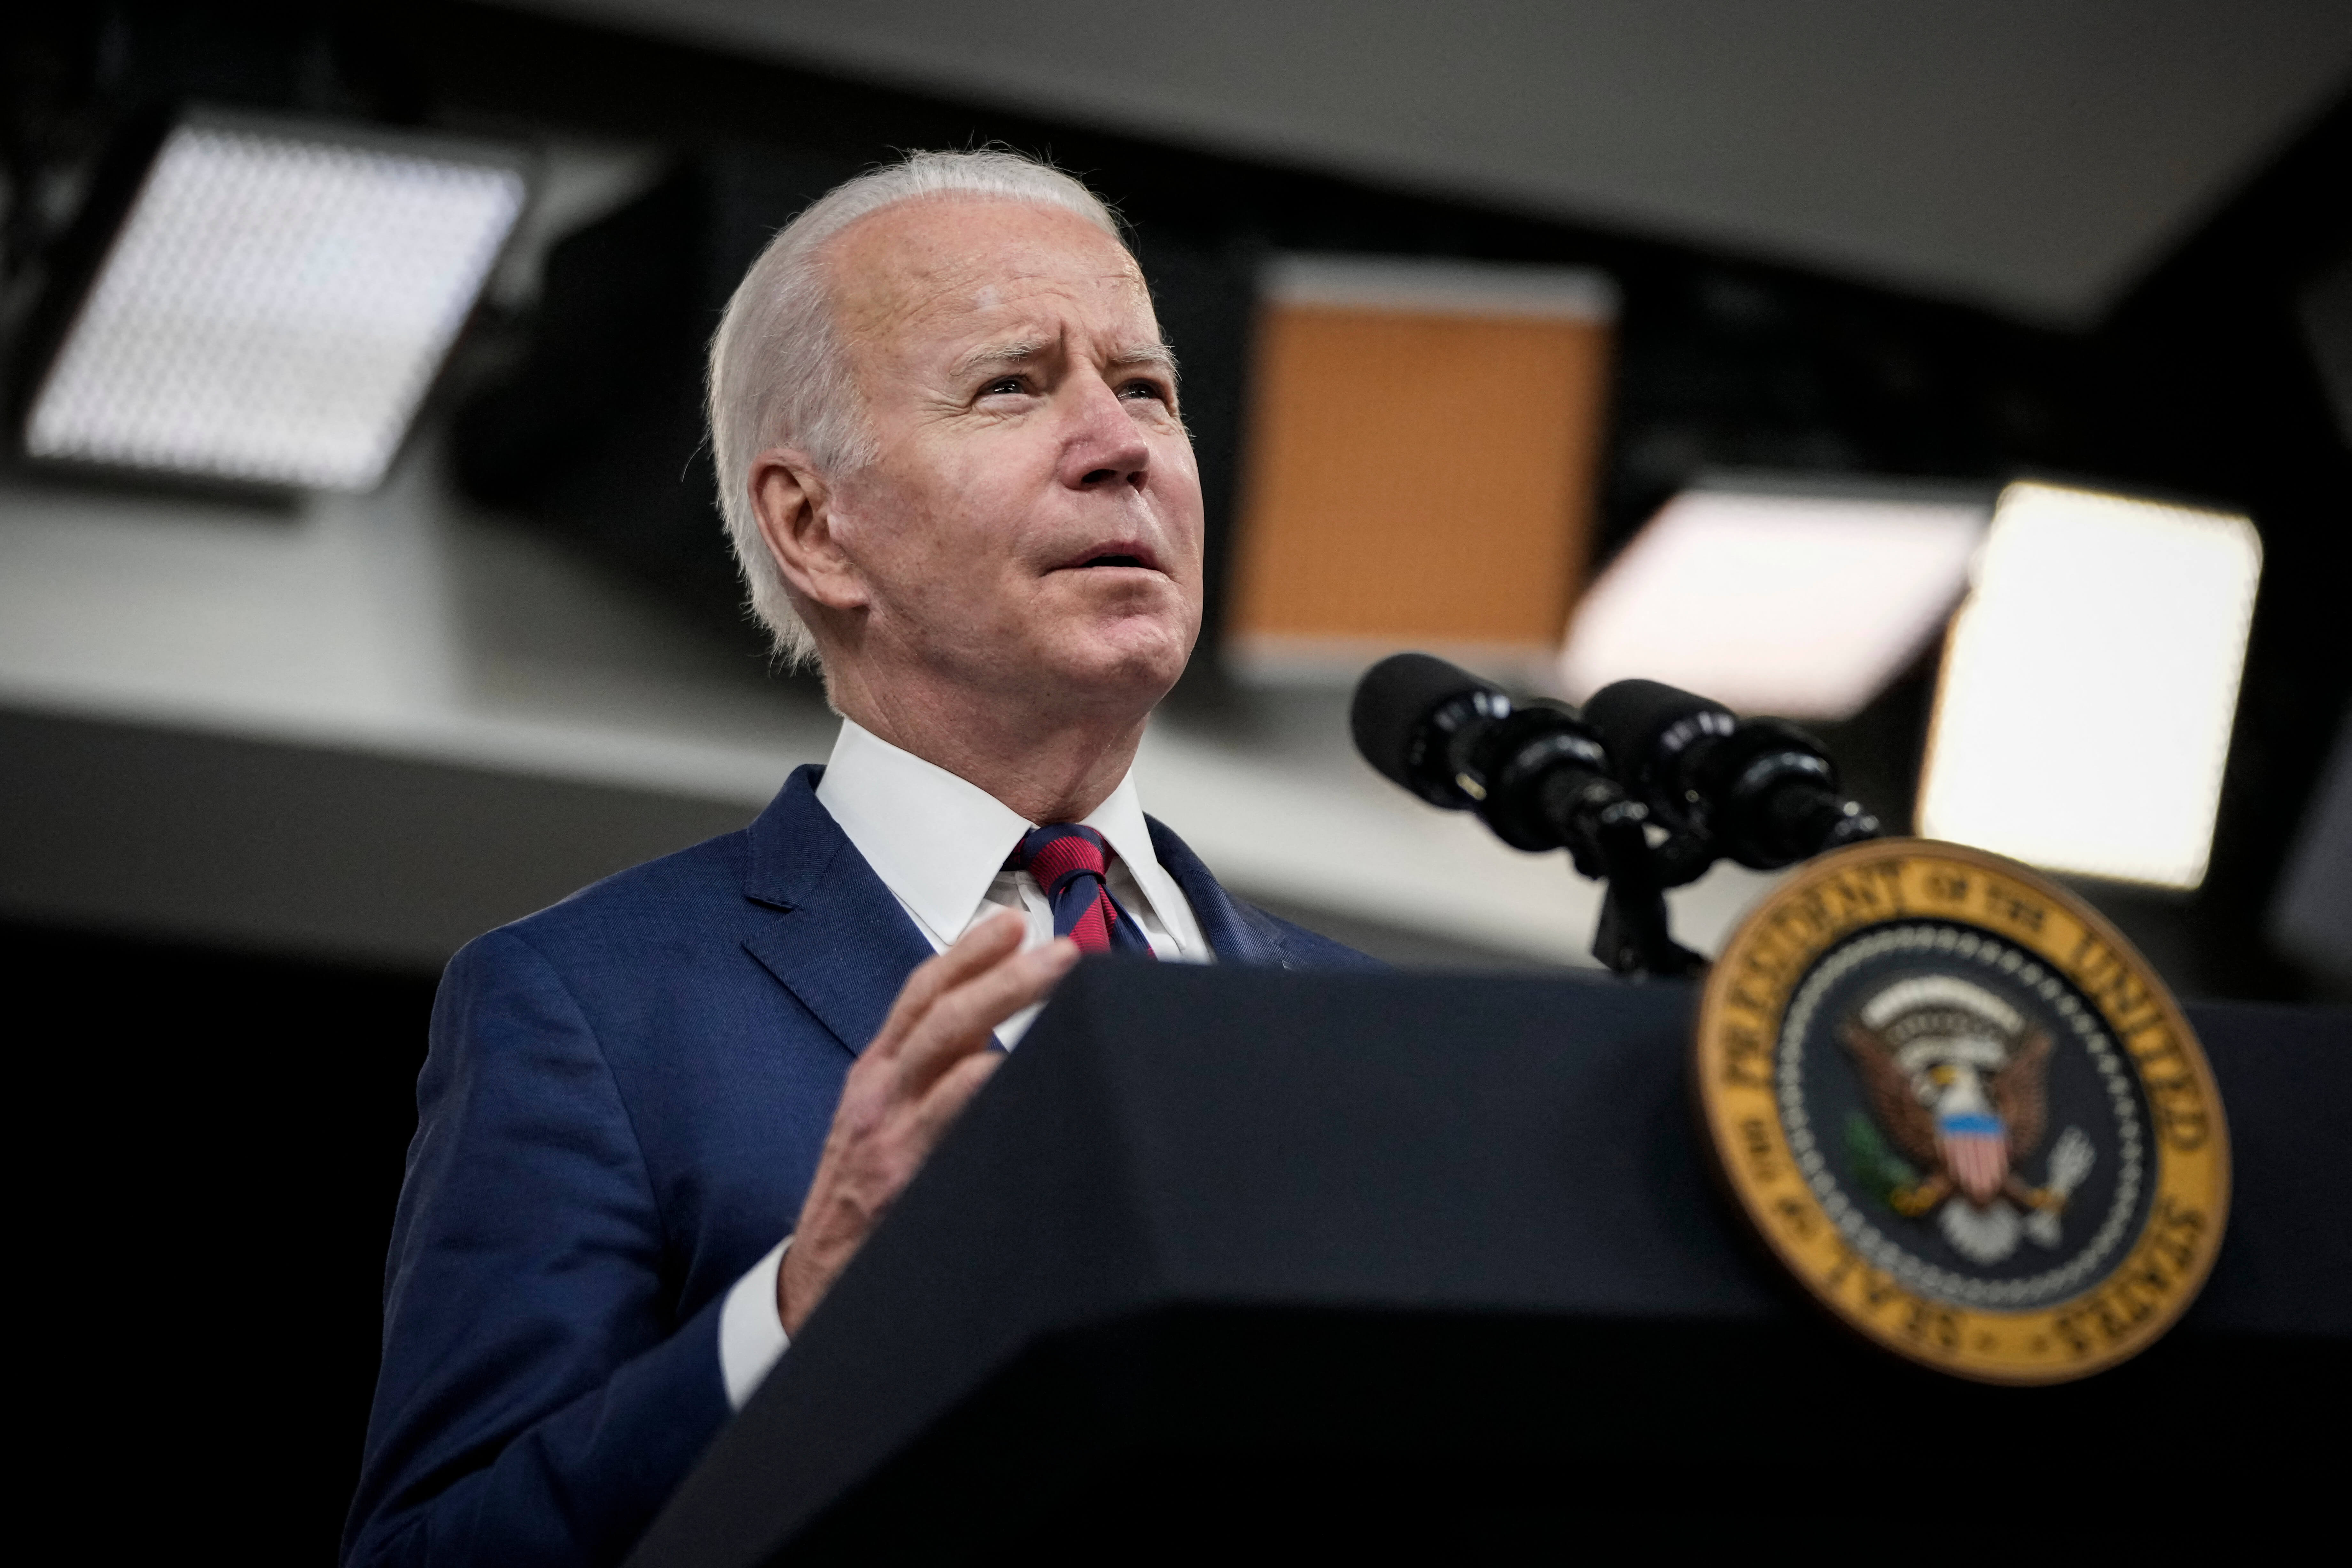 President Joe Biden has signed a new proclamation to revoke the travel ban imposed on travellers from eight southern African countries due to the Omicron variant.